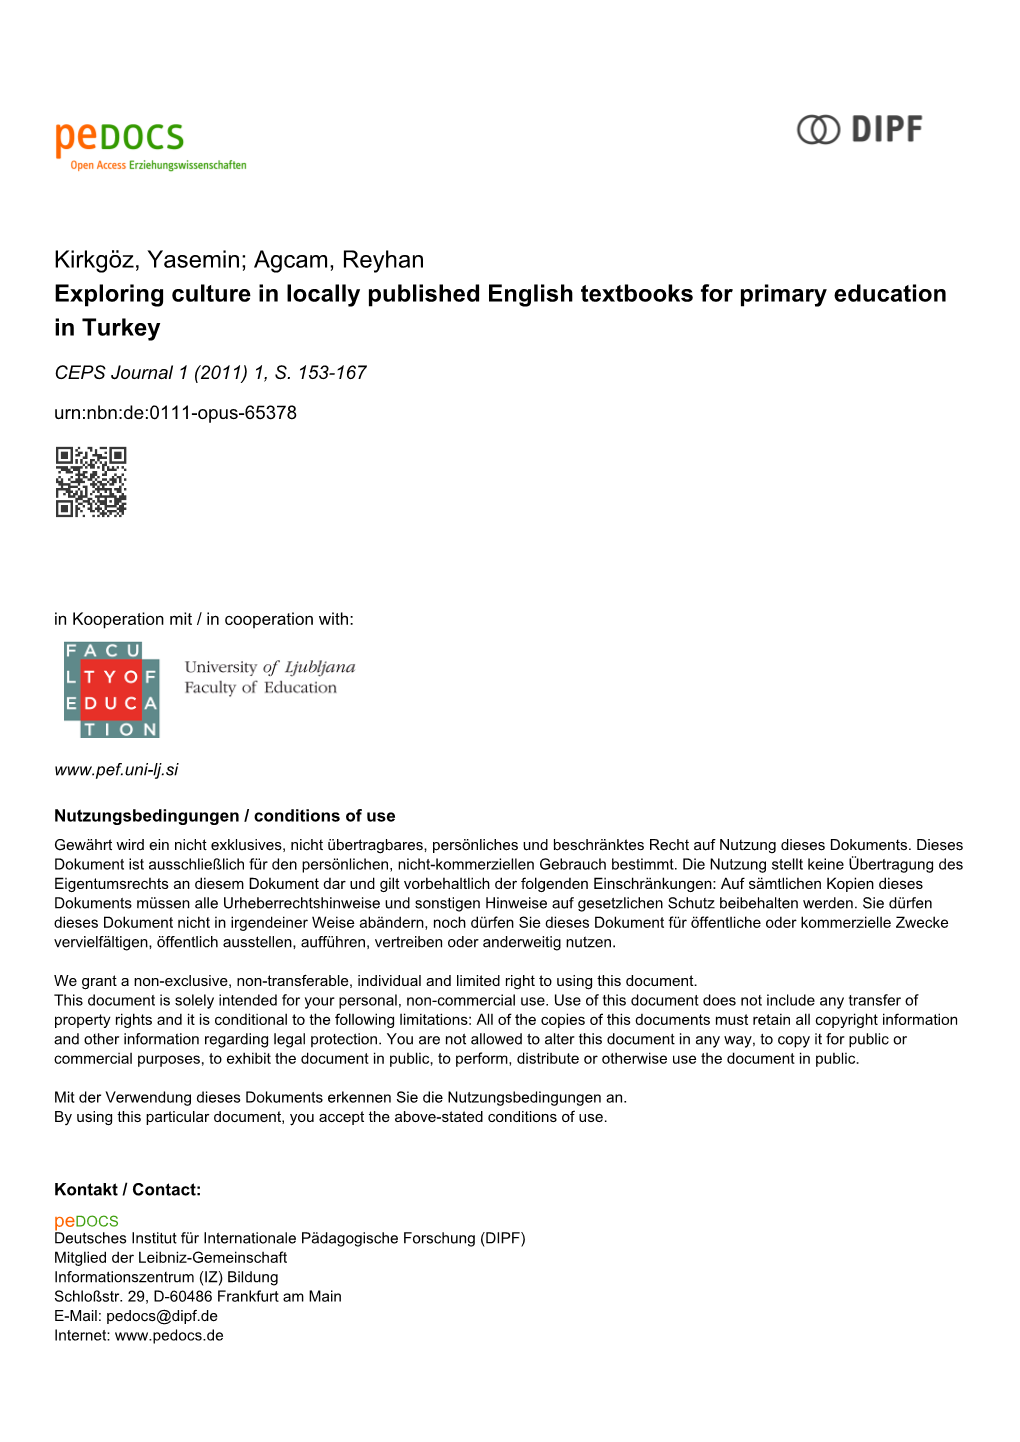 Exploring Culture in Locally Published English Textbooks for Primary Education in Turkey